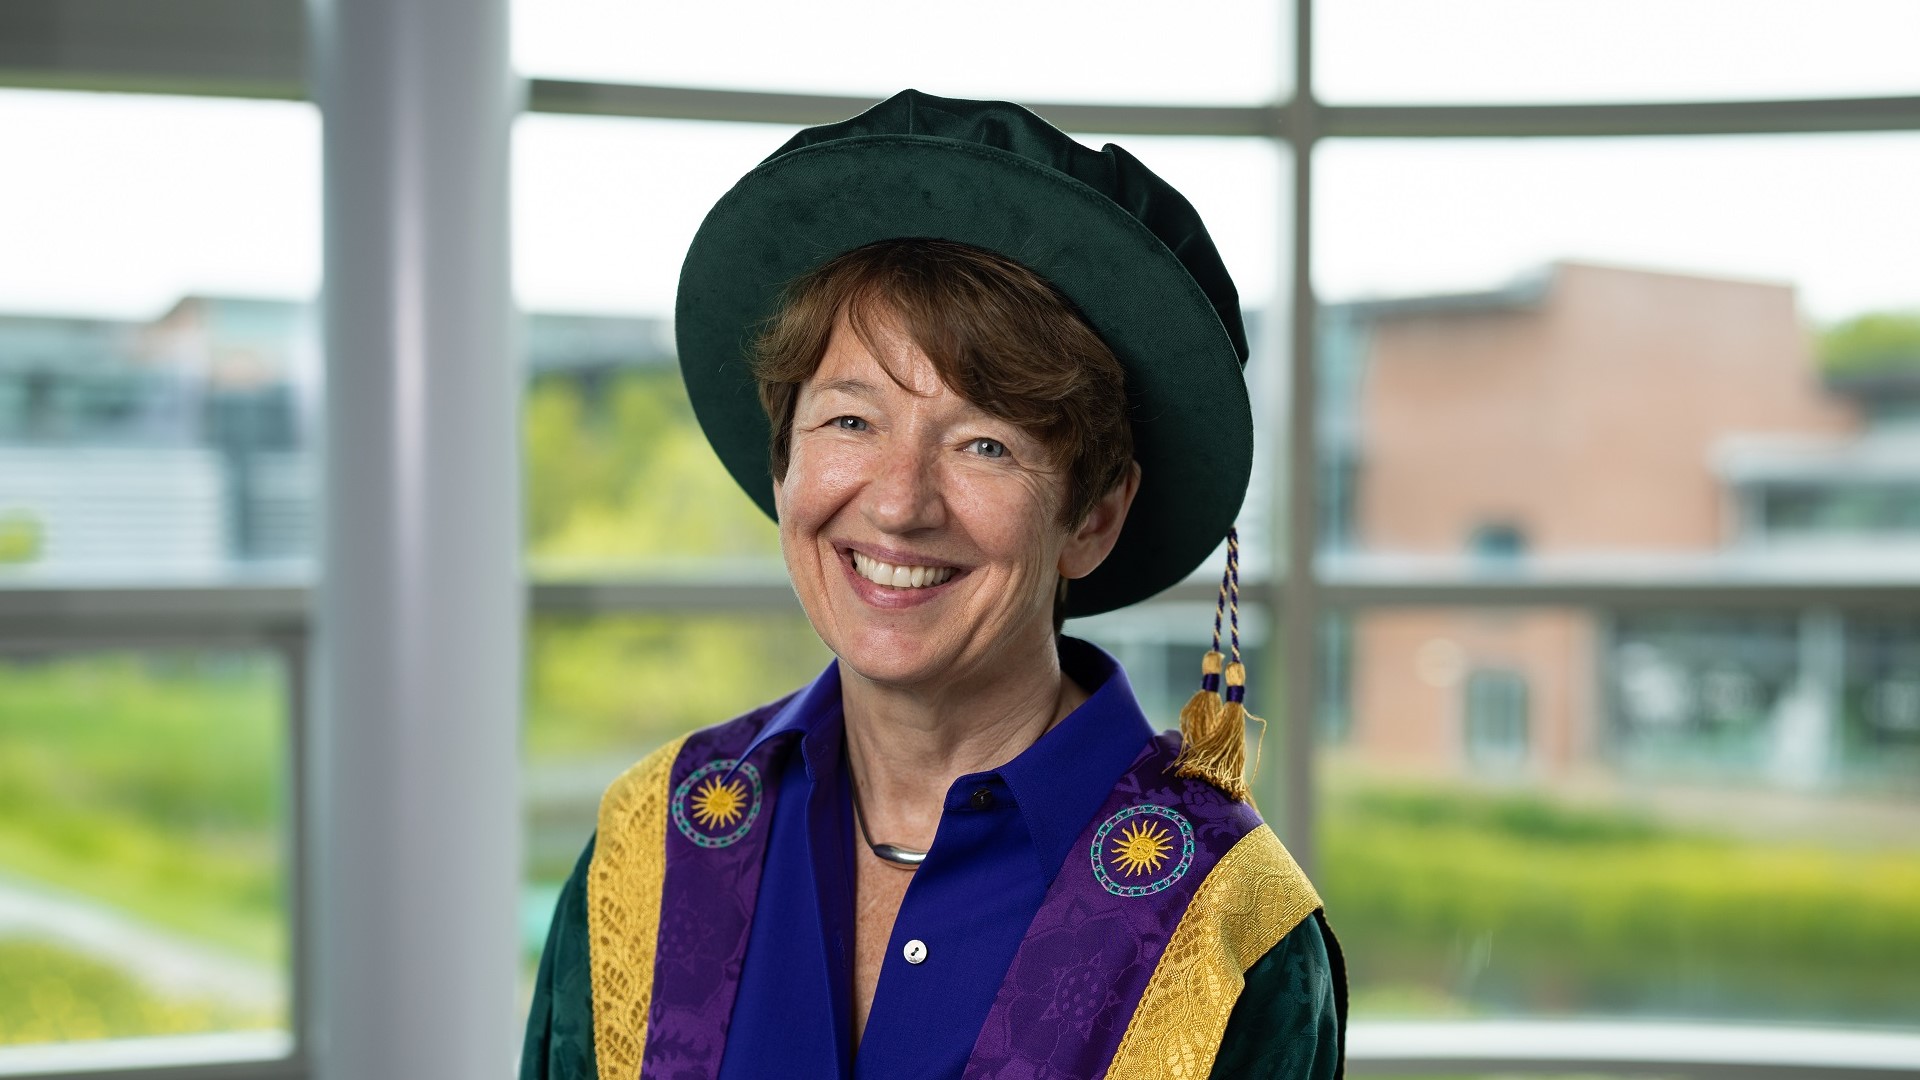 Dawn Airey wears a dark green hat with golden tassle and purple, gold and green robes.